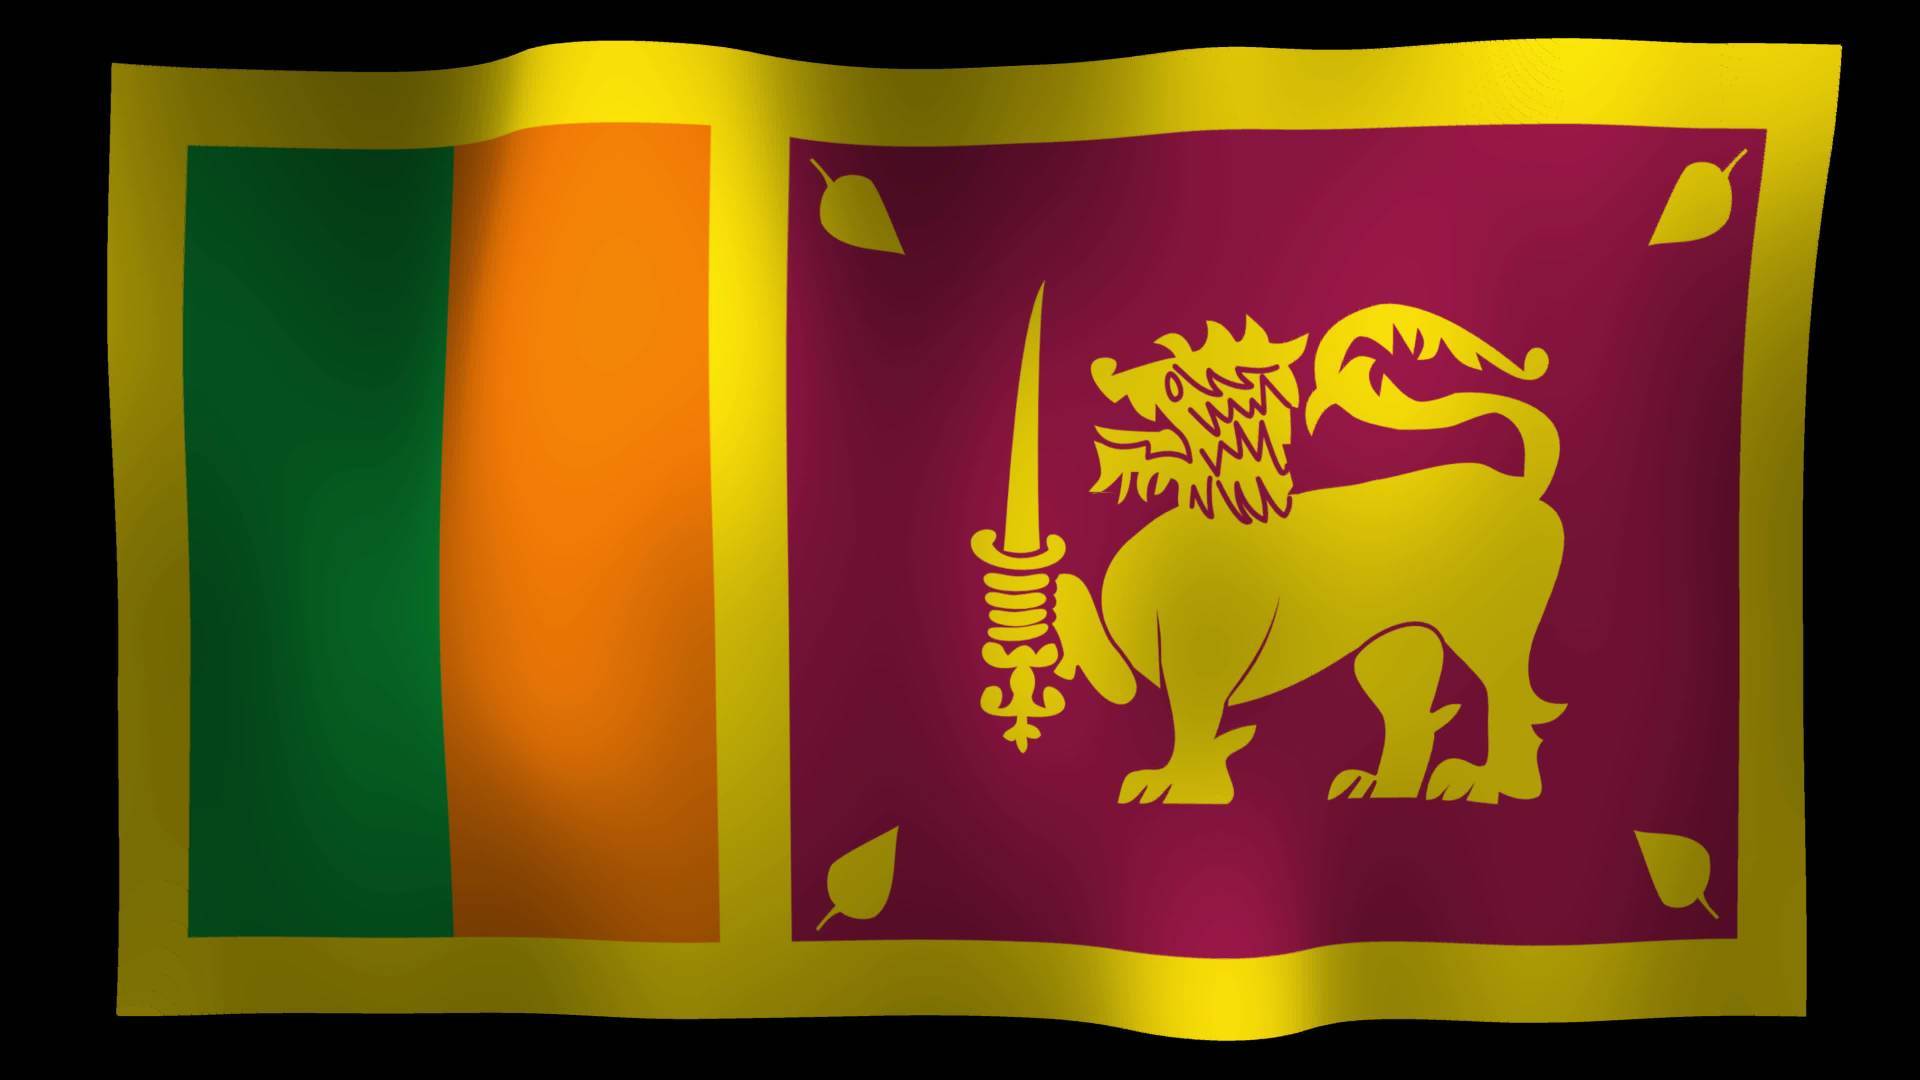 Sri Lanka 70th Independence Day , HD Wallpaper & Backgrounds